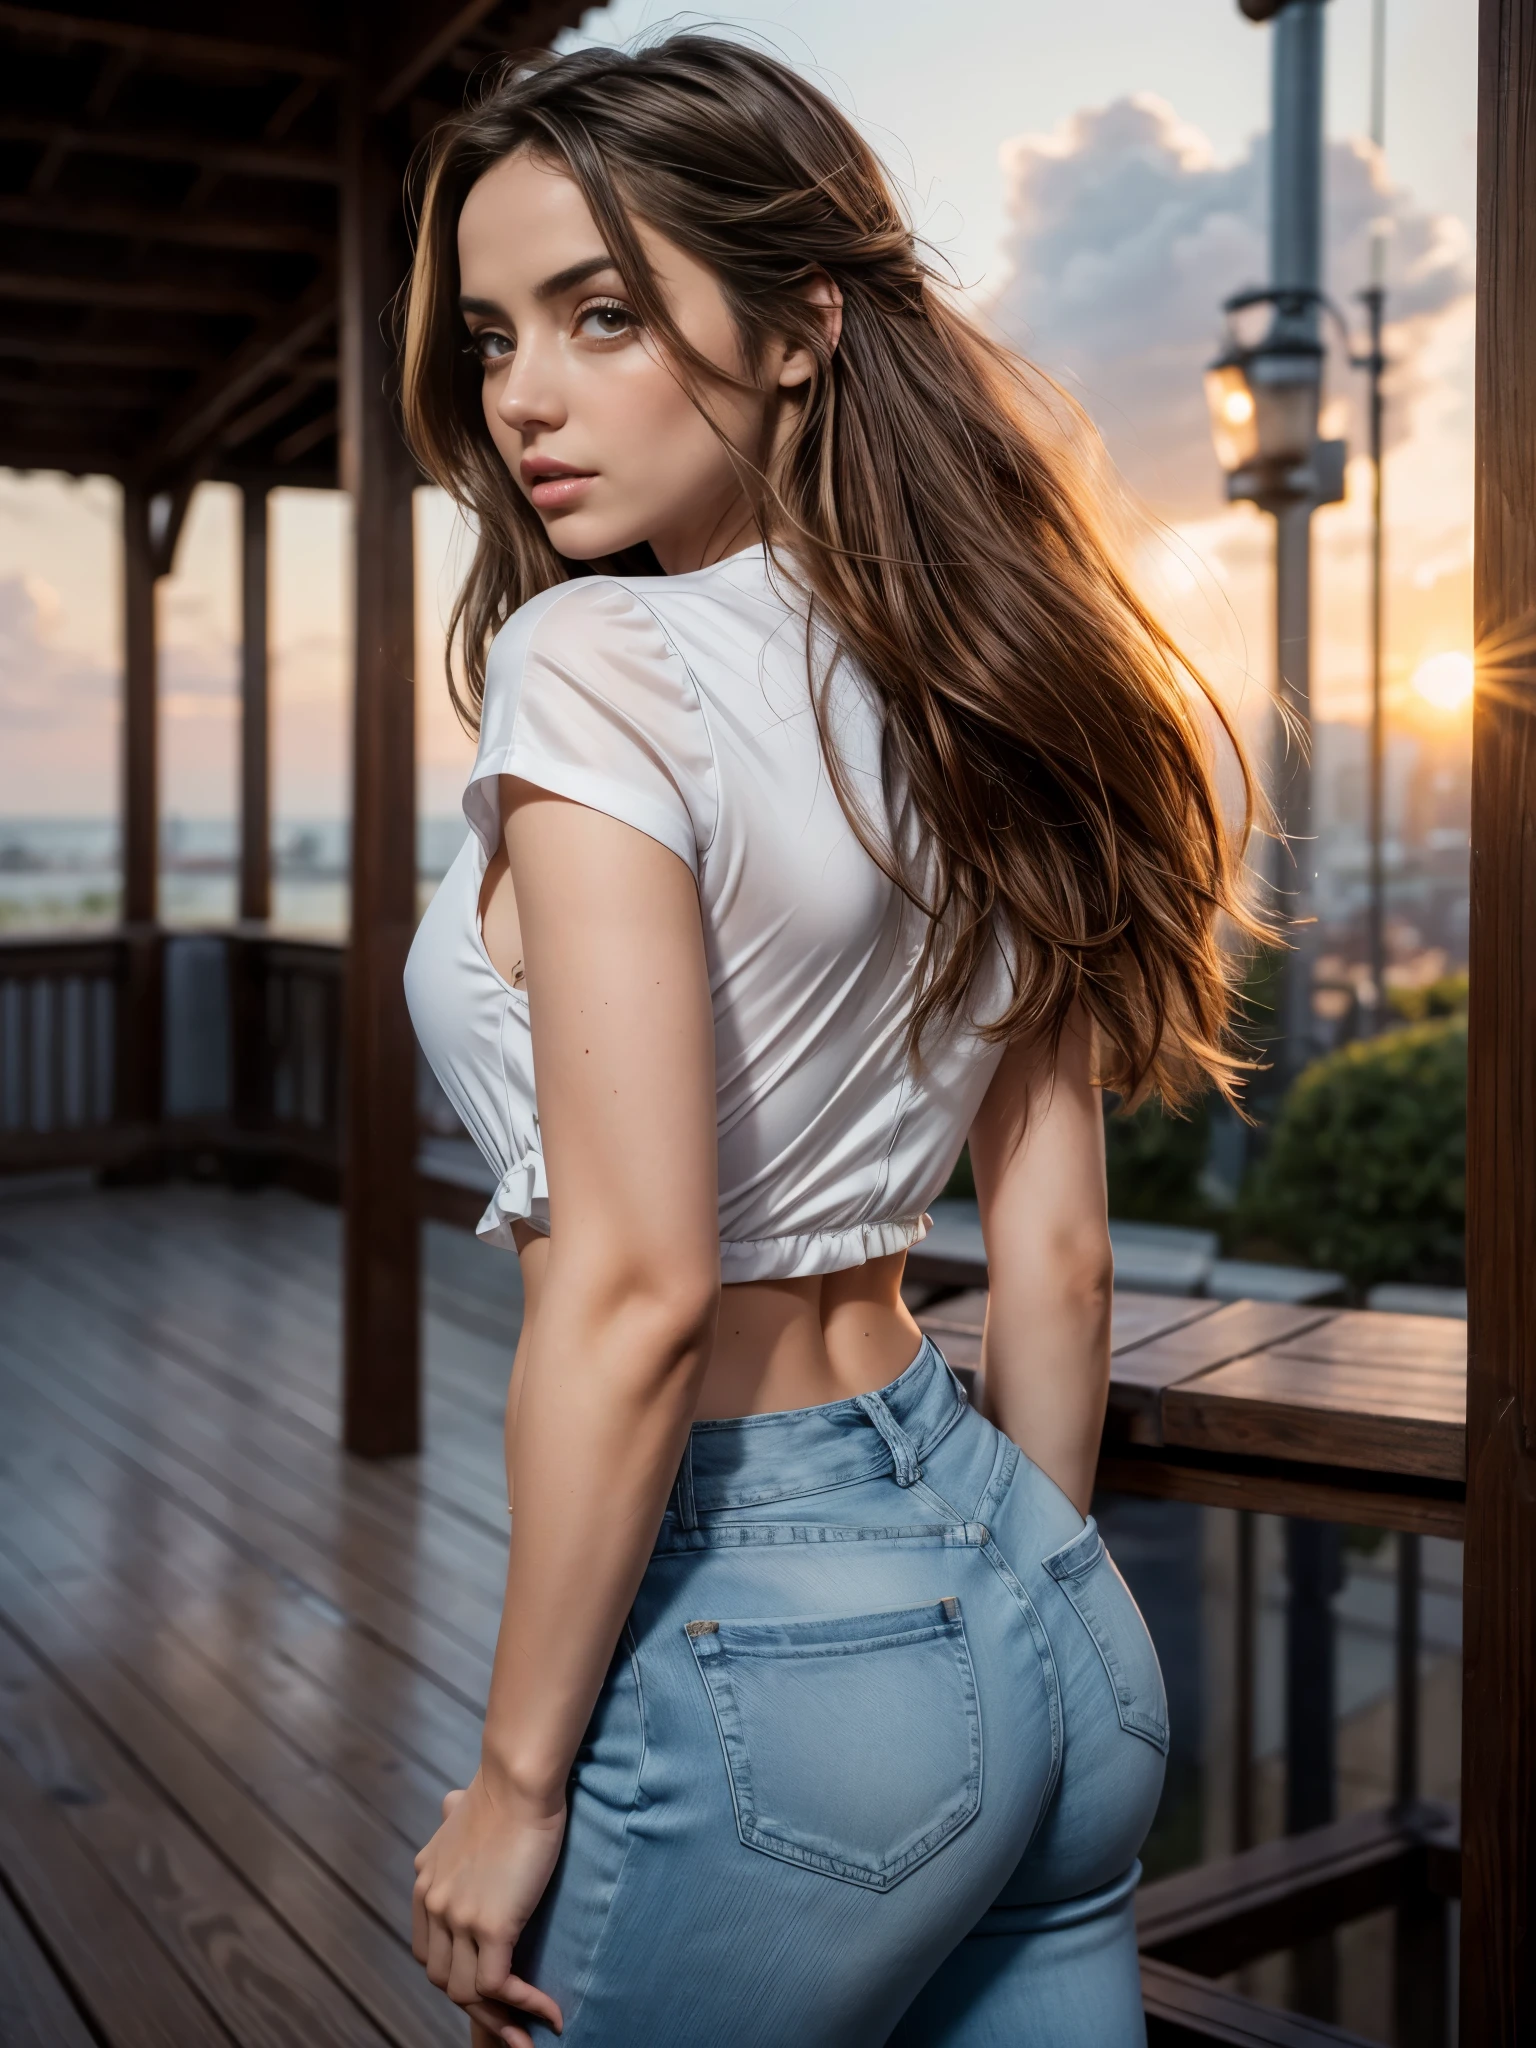 full length photoshoot, sexy woman (Ana de Armas), long curly brown hair, gorgeous eyes, high arched eyebrows, seductive look, white low-cut silk shirt, blue fitted jeans, stilettos, sunset modern metropolis, spot lighting, backlight on hair, shallow depth of field, homogeneous background